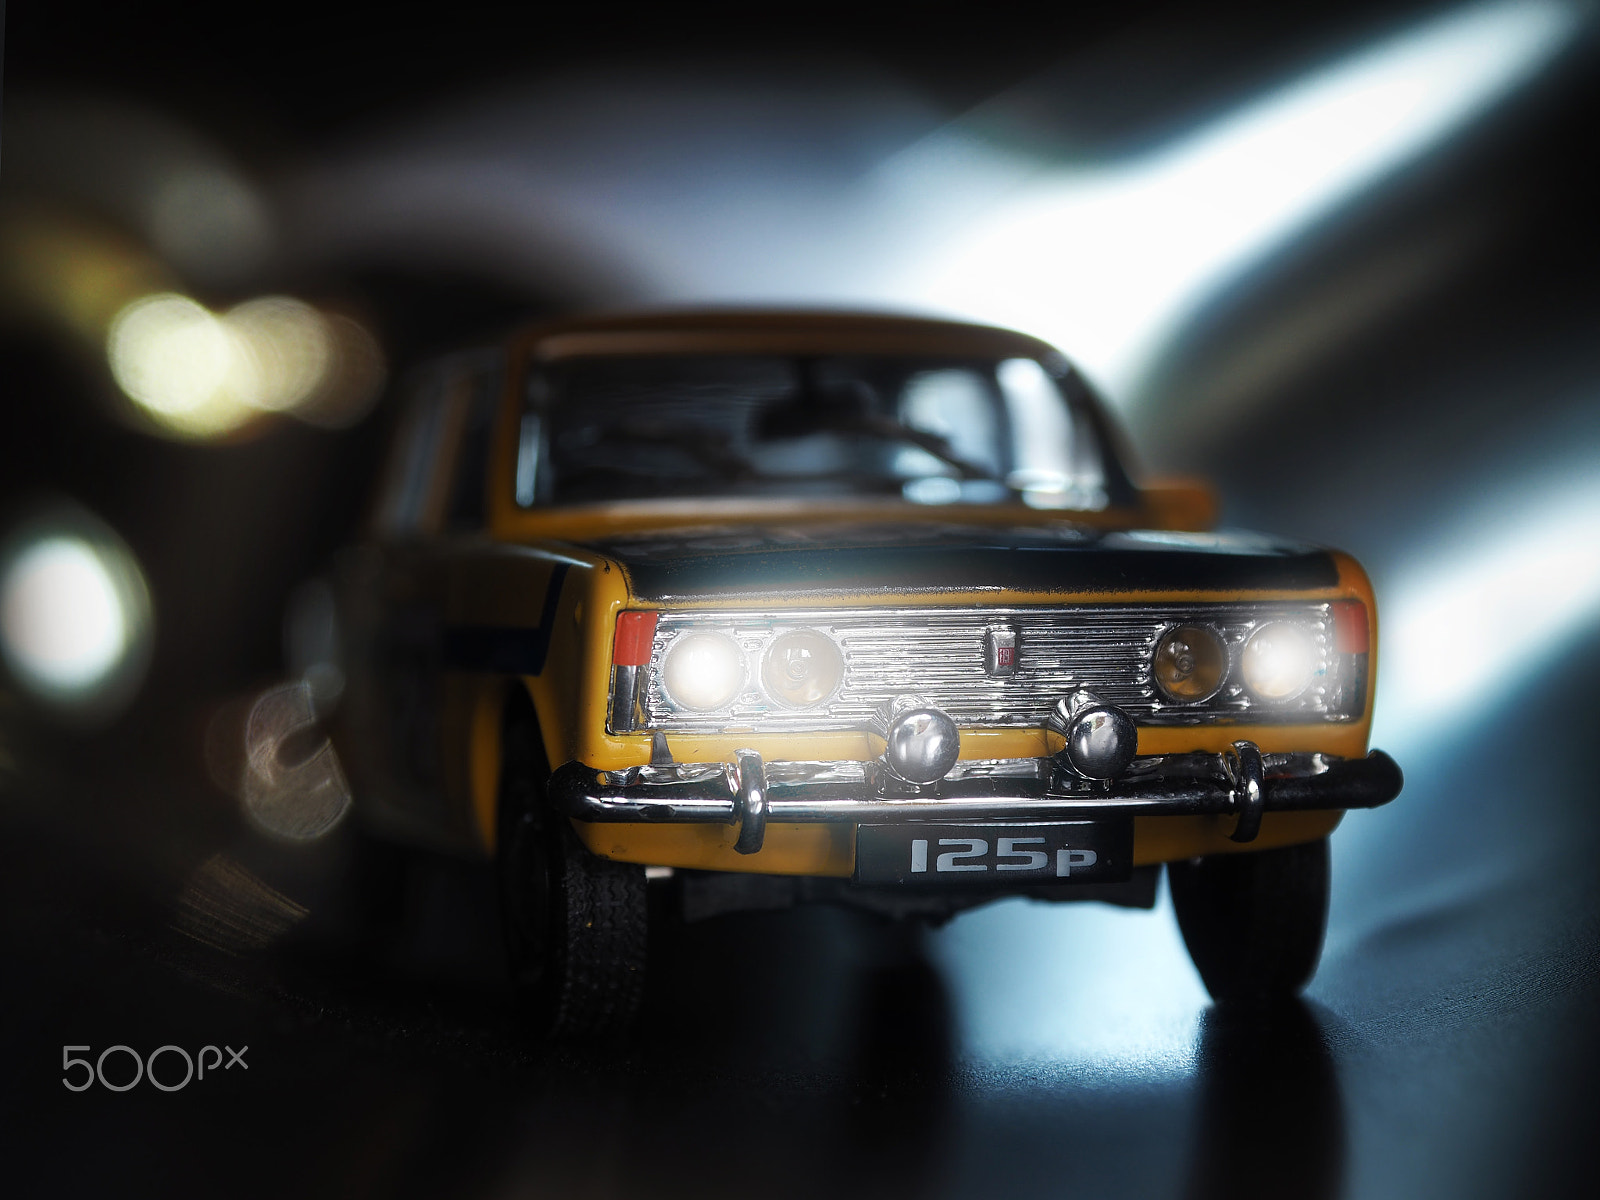 Olympus OM-D E-M10 II sample photo. Small car toy fiat 125p photography